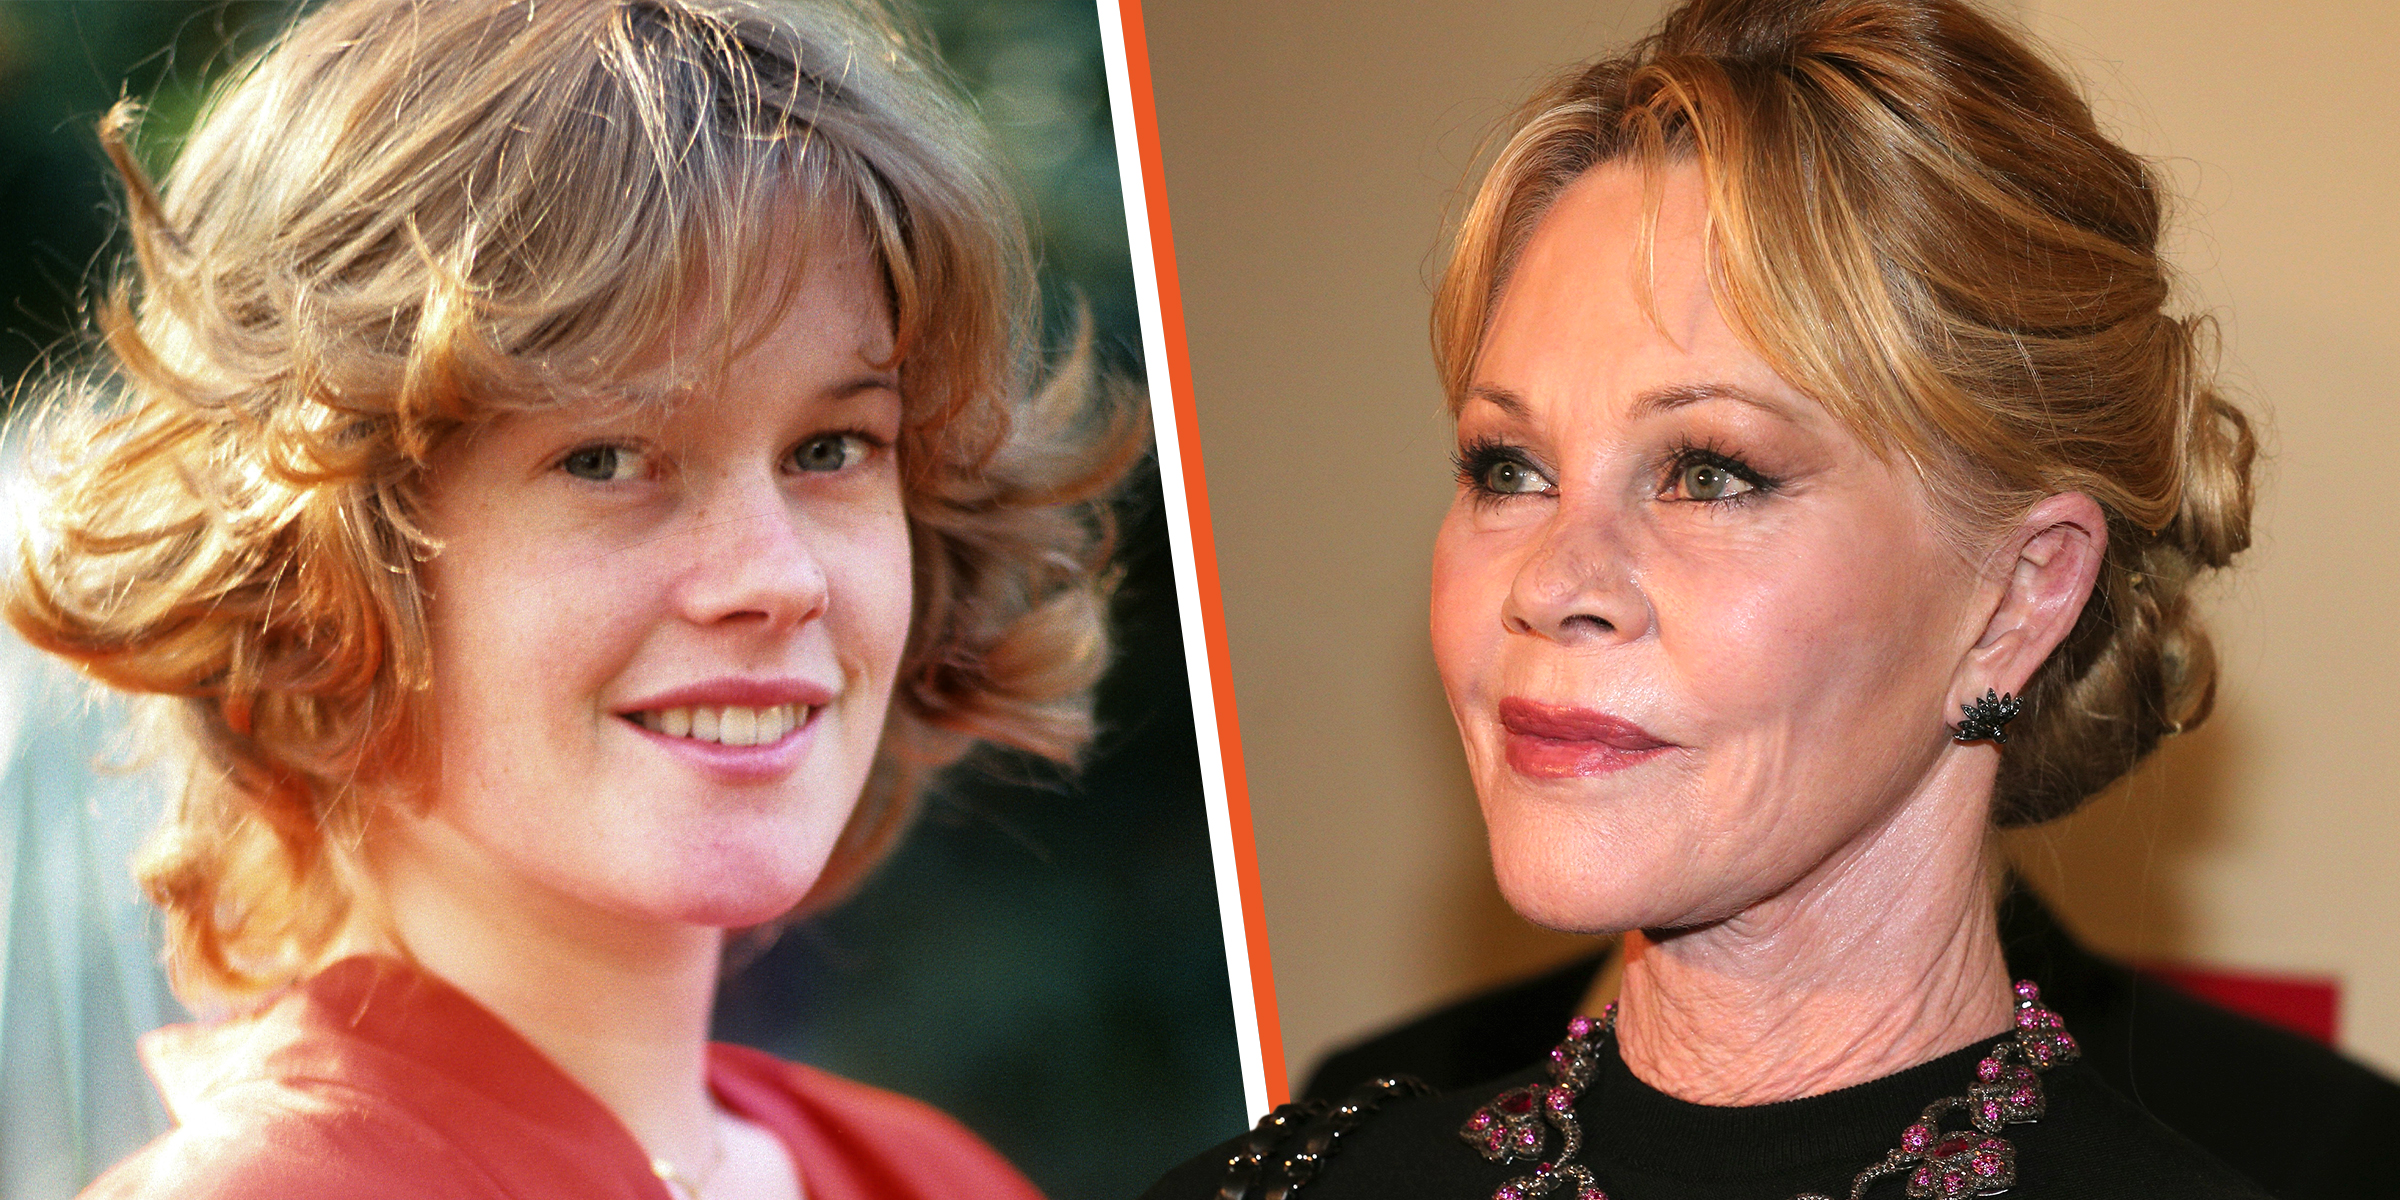 Melanie Griffith | Source: Getty Images